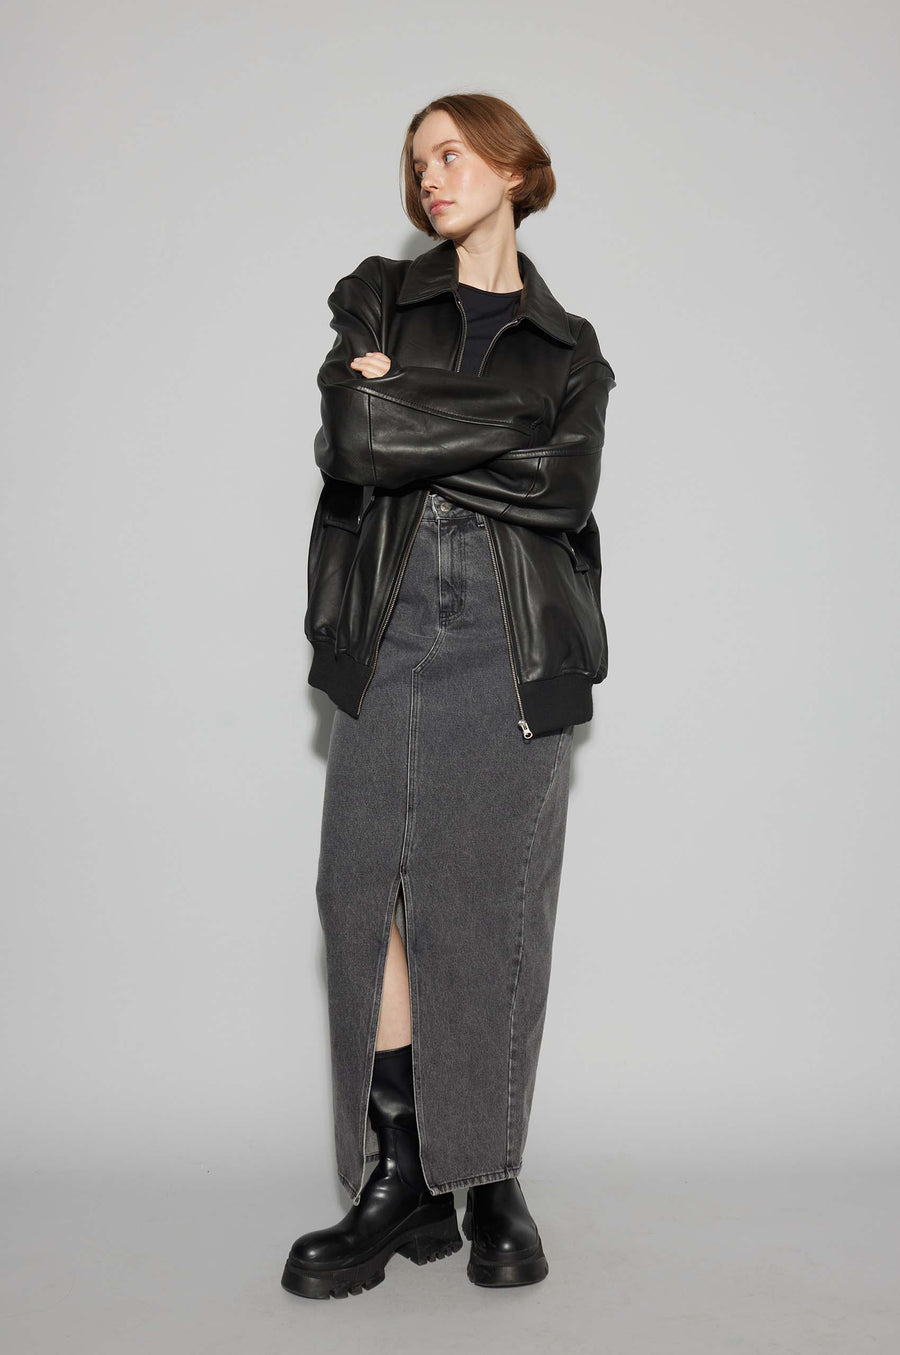 OVAL SQUARE Proven Leather Bomber in Black